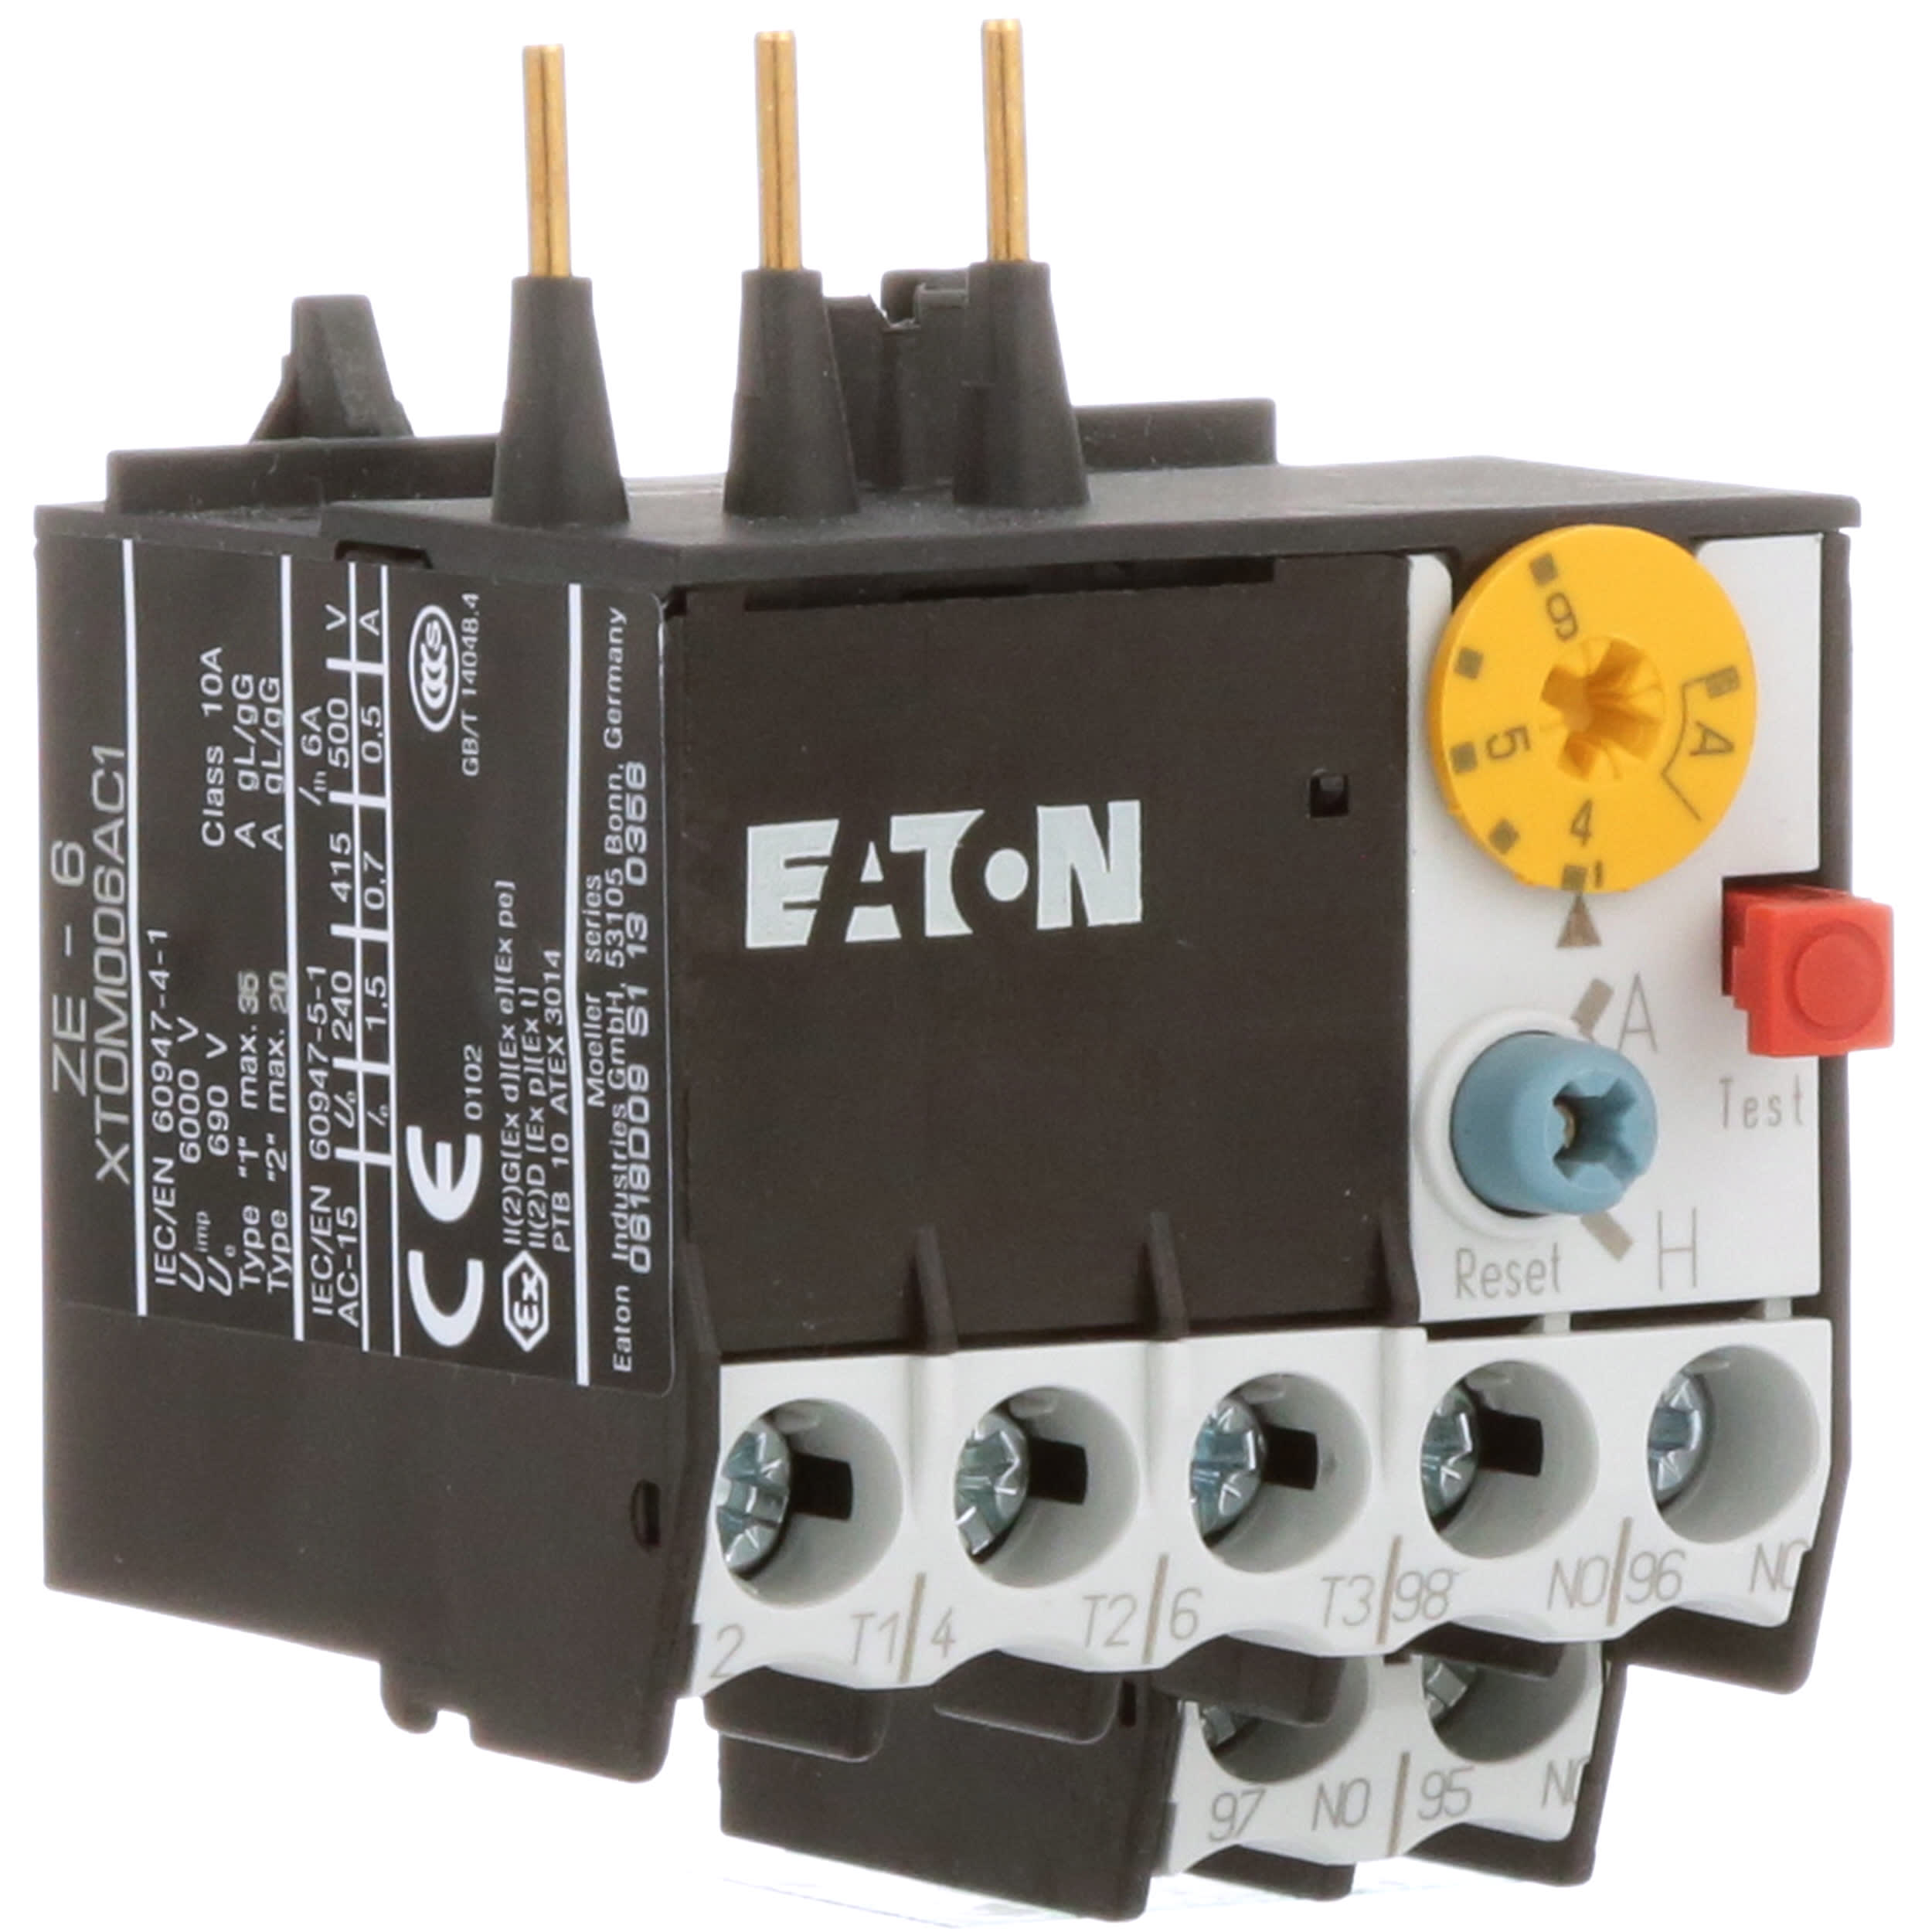 Details about   1pcs New Eaton Relay XTOD006CC1S